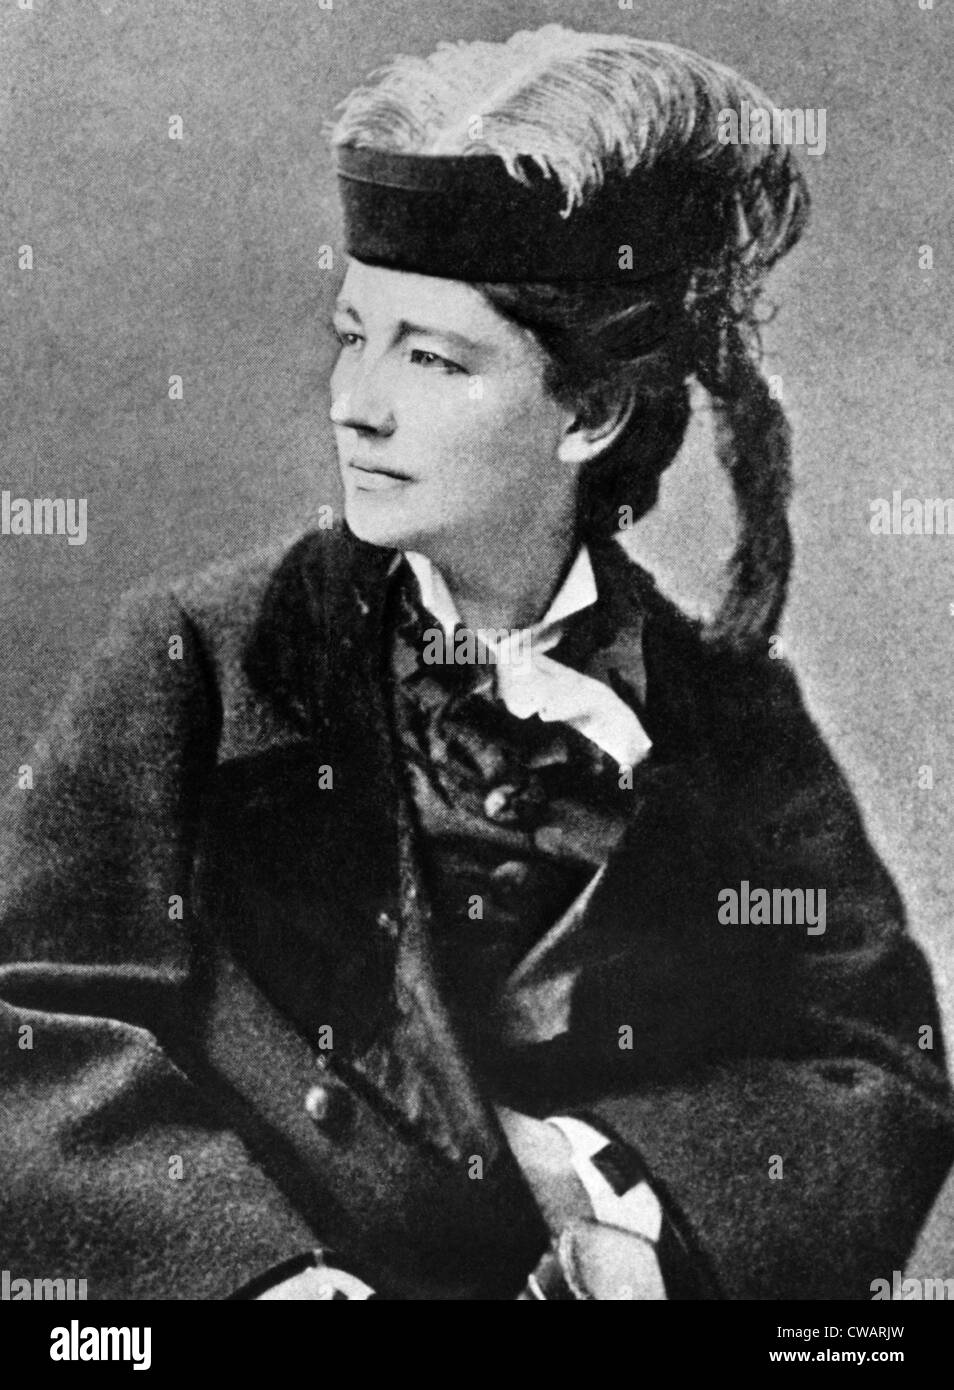 Victoria Woodhull (1838-1927), early American woman's rights leader, circa 1890s. Courtesy: CSU Archives/Everett Collection Stock Photo